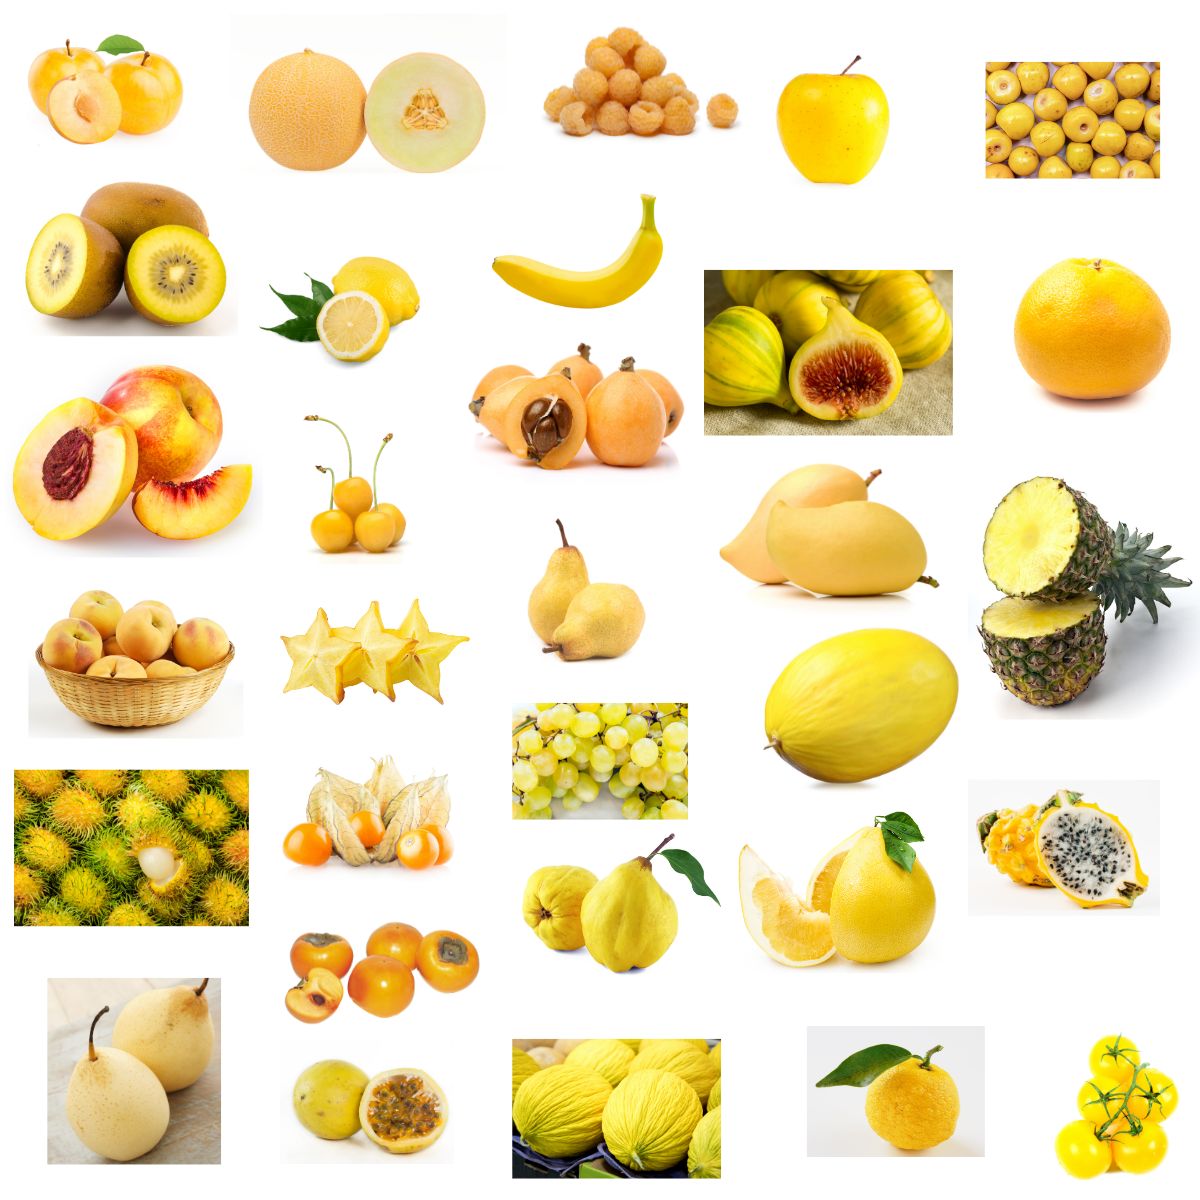 A collage with a variety of yellow fruits.